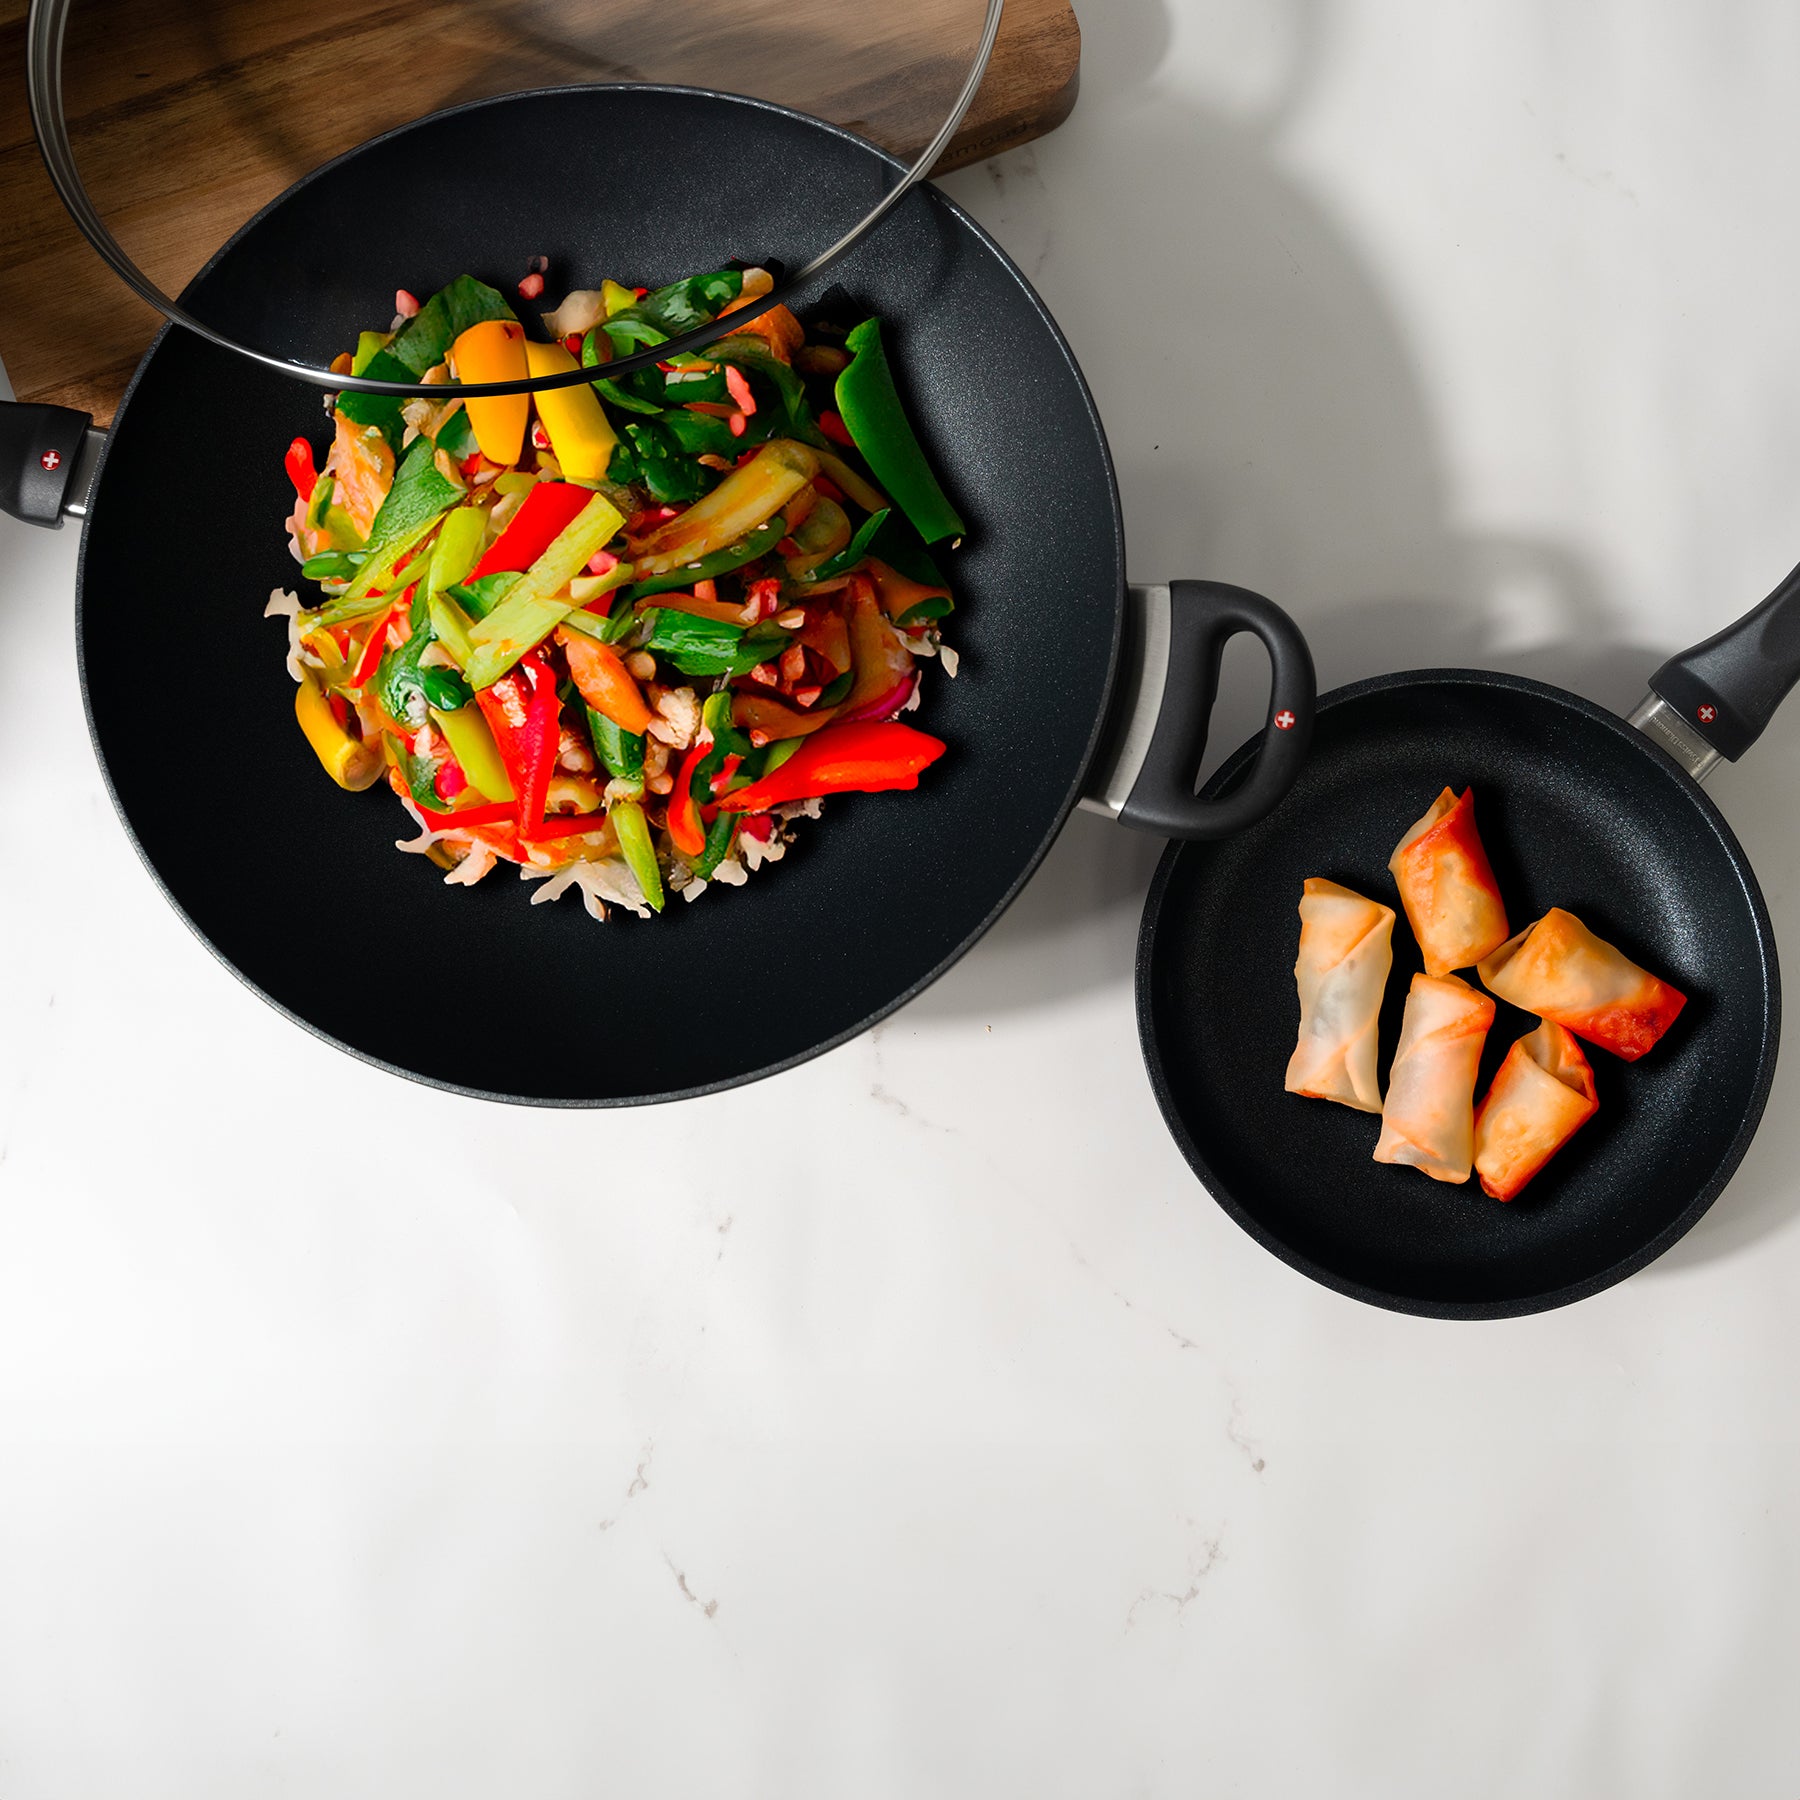 XD Nonstick 8" Fry Pan and 12.5" Wok with Glass Lid Set with food inside on a marble kitchen countertop